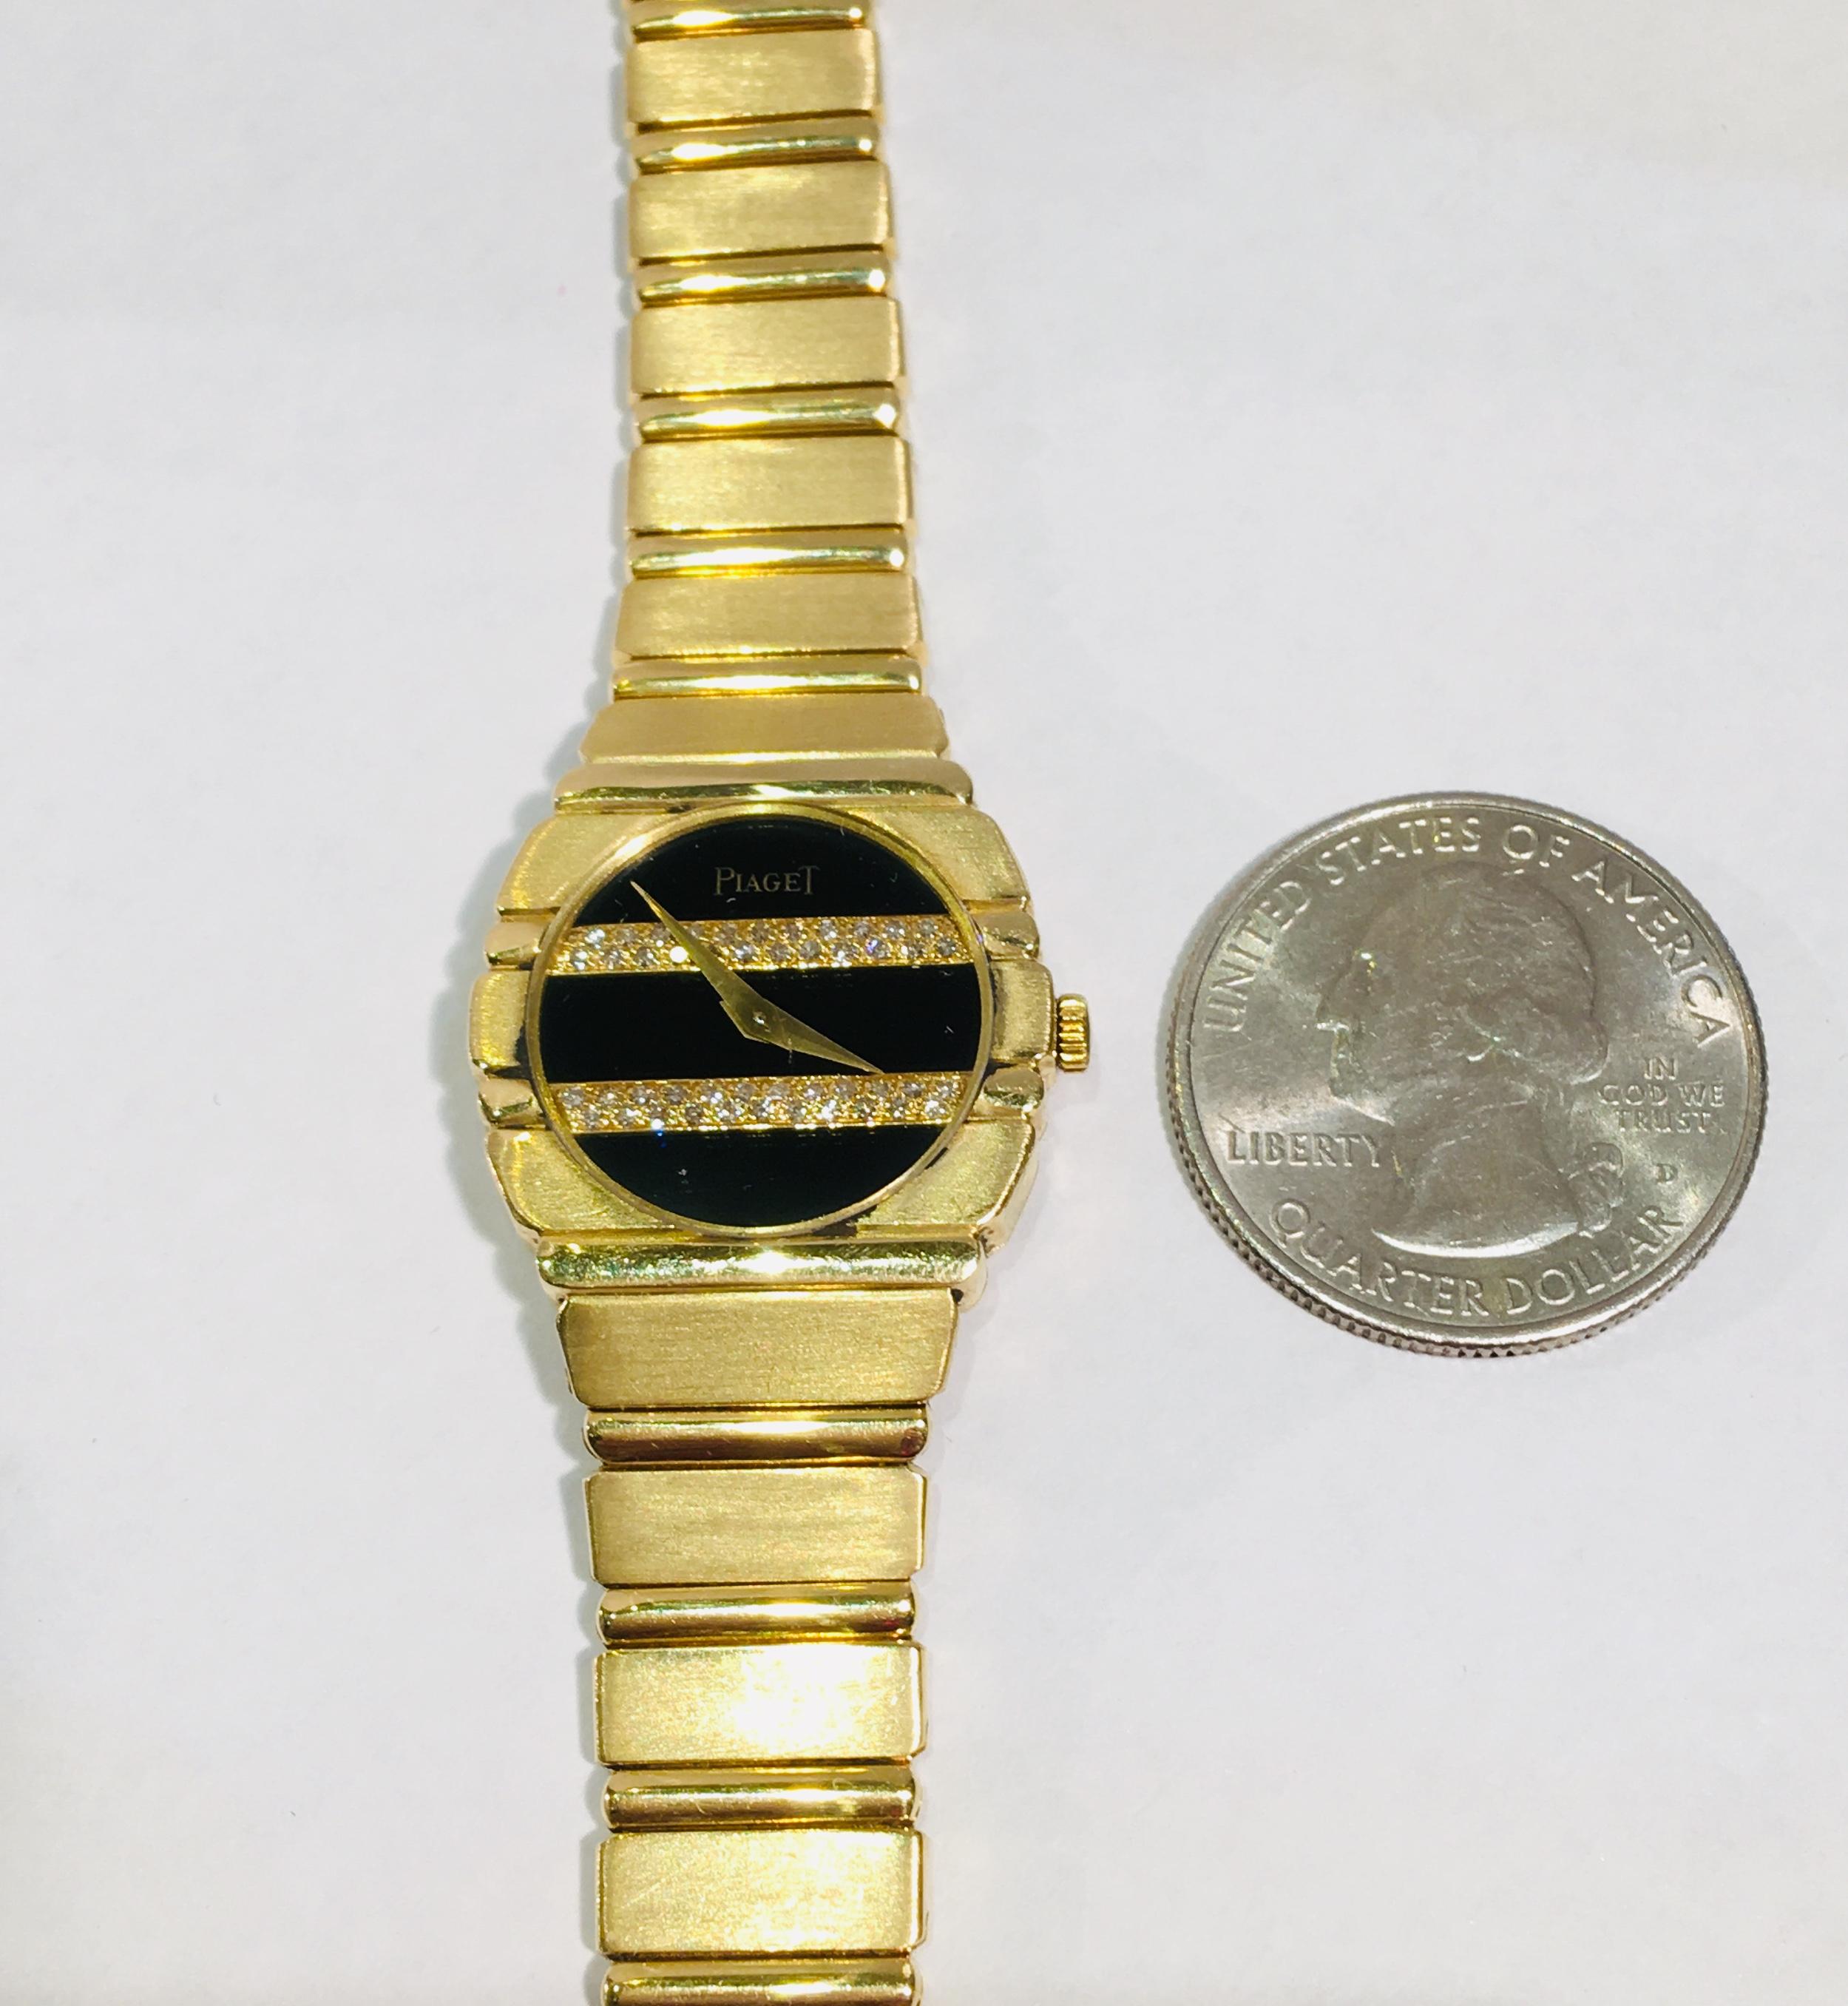 18 karat yellow gold ladies Piaget Polo watch features a round black onyx face with two signature horizontal double rows of diamond pave stripes and floating gold hands.  Crystal is scratch-resistant sapphire.  Solid 18k gold case and bracelet